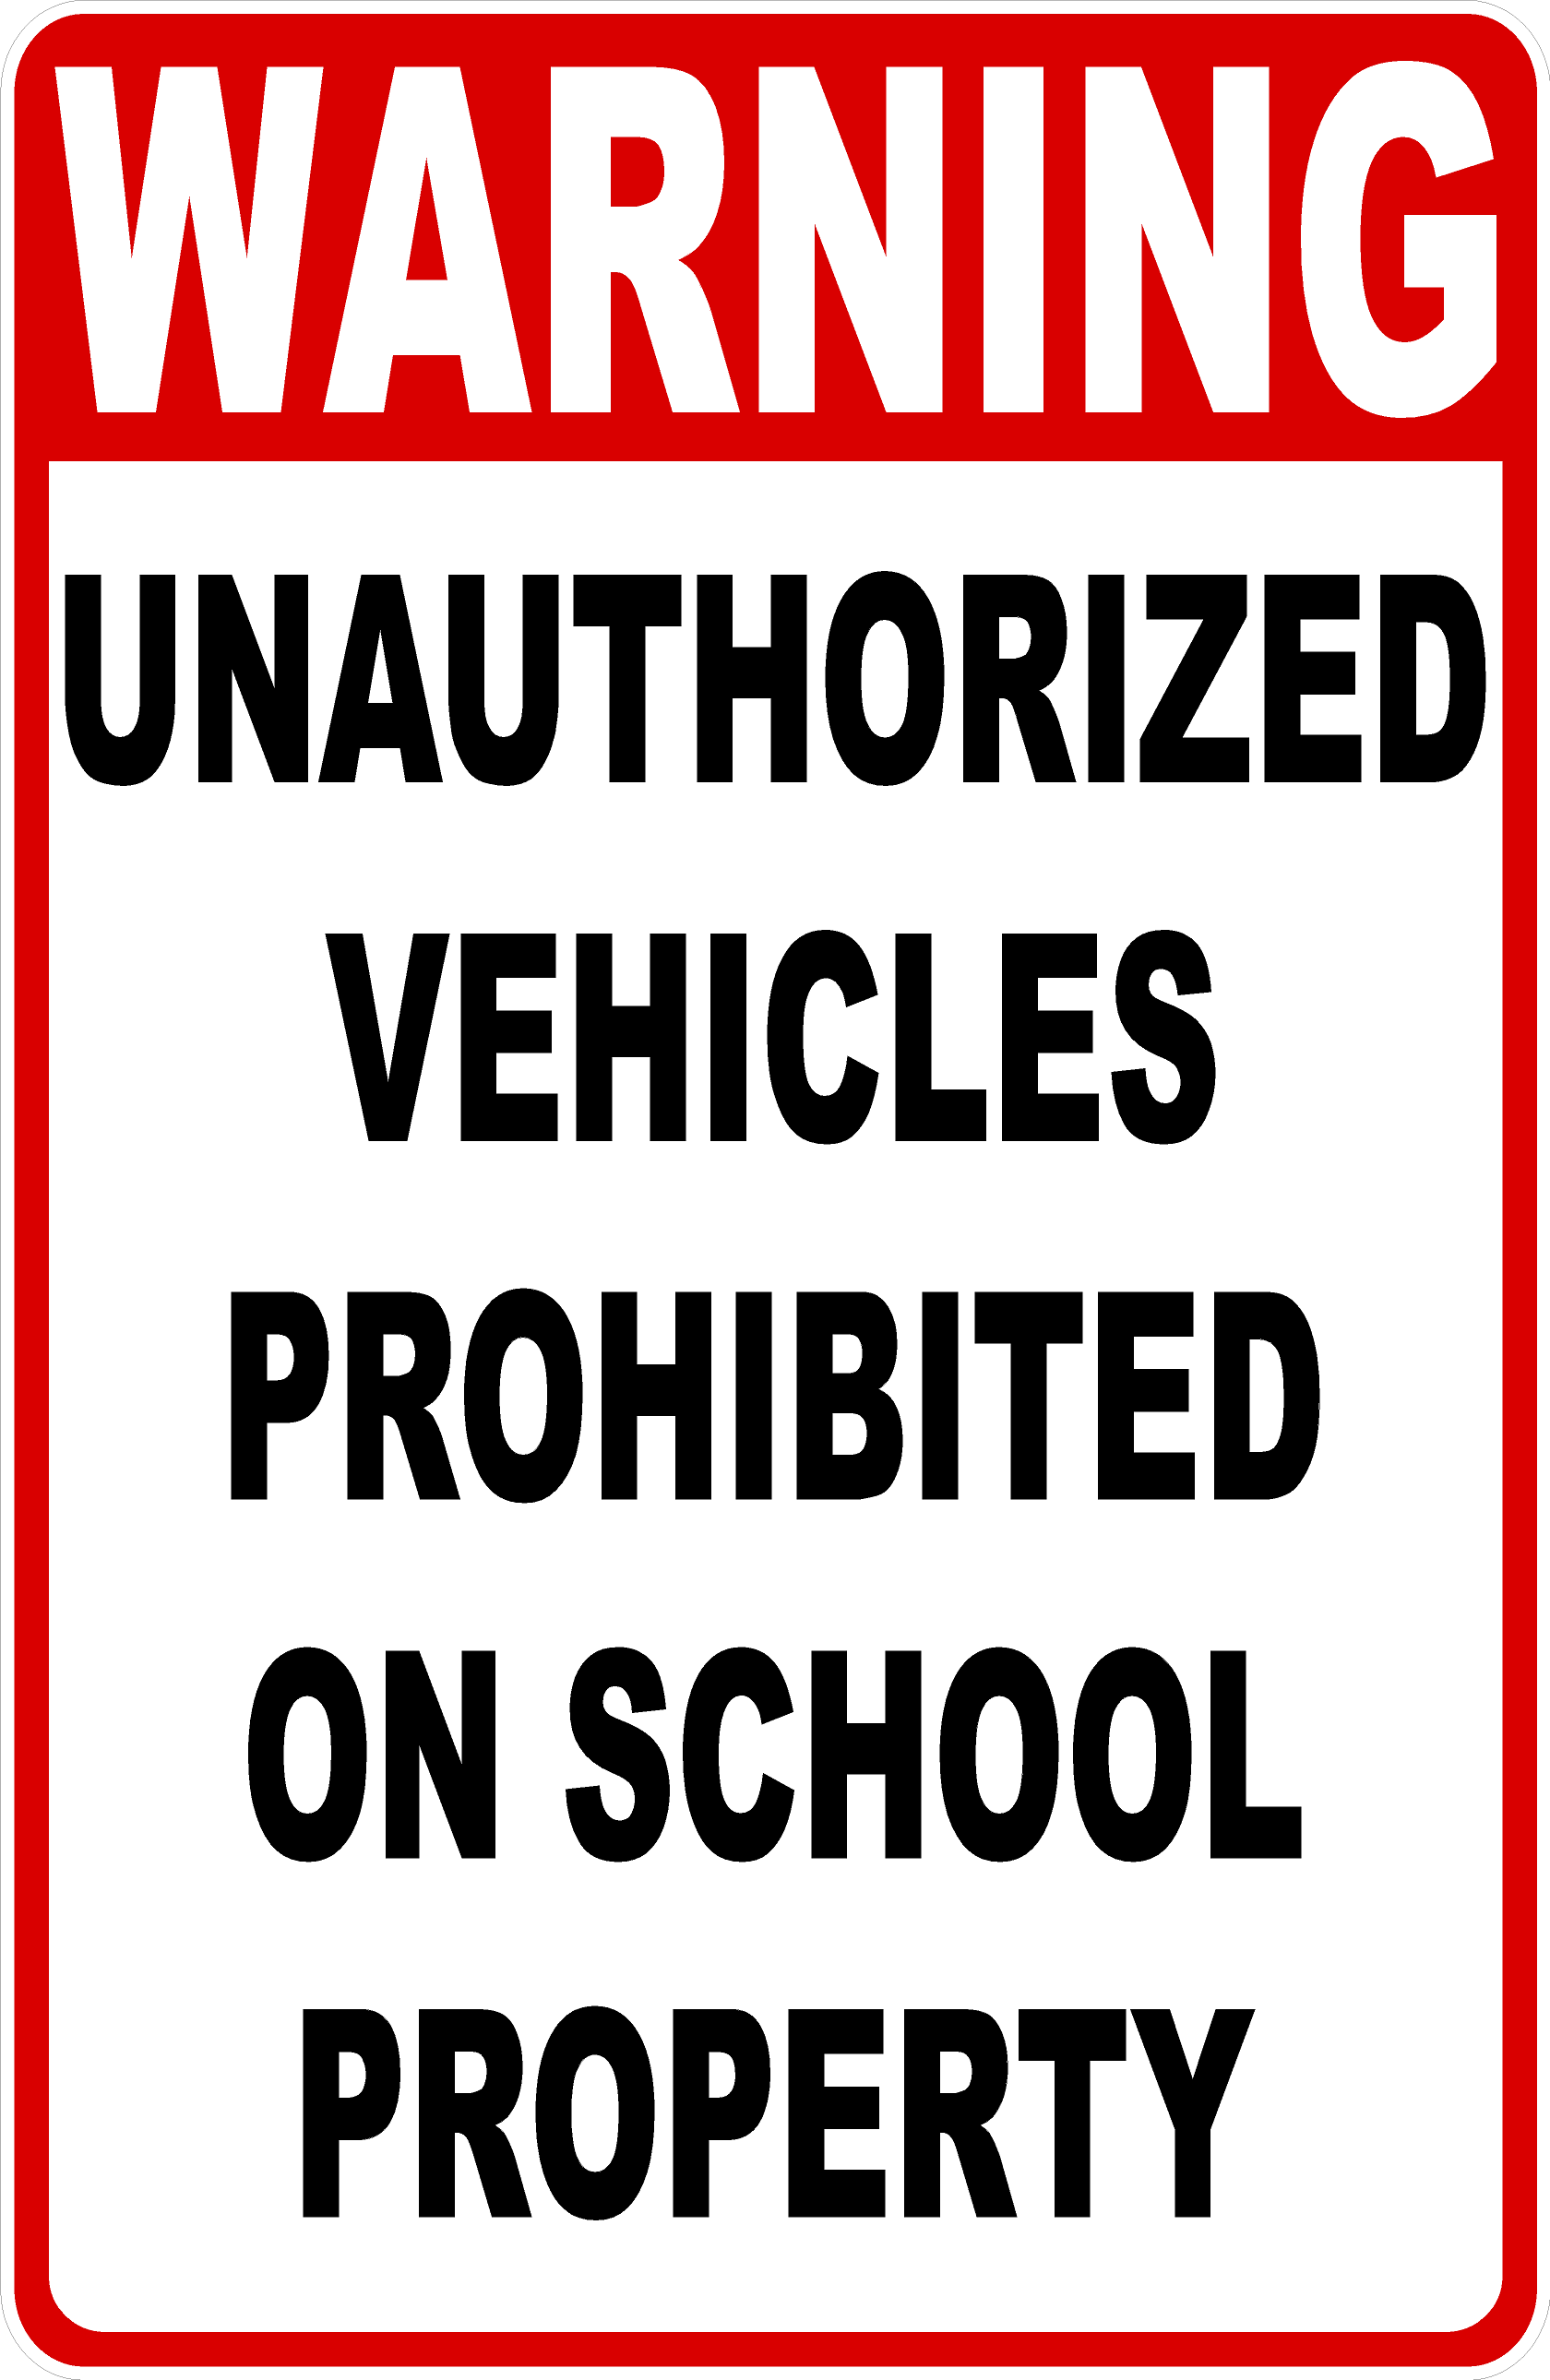 prohibited entry sign